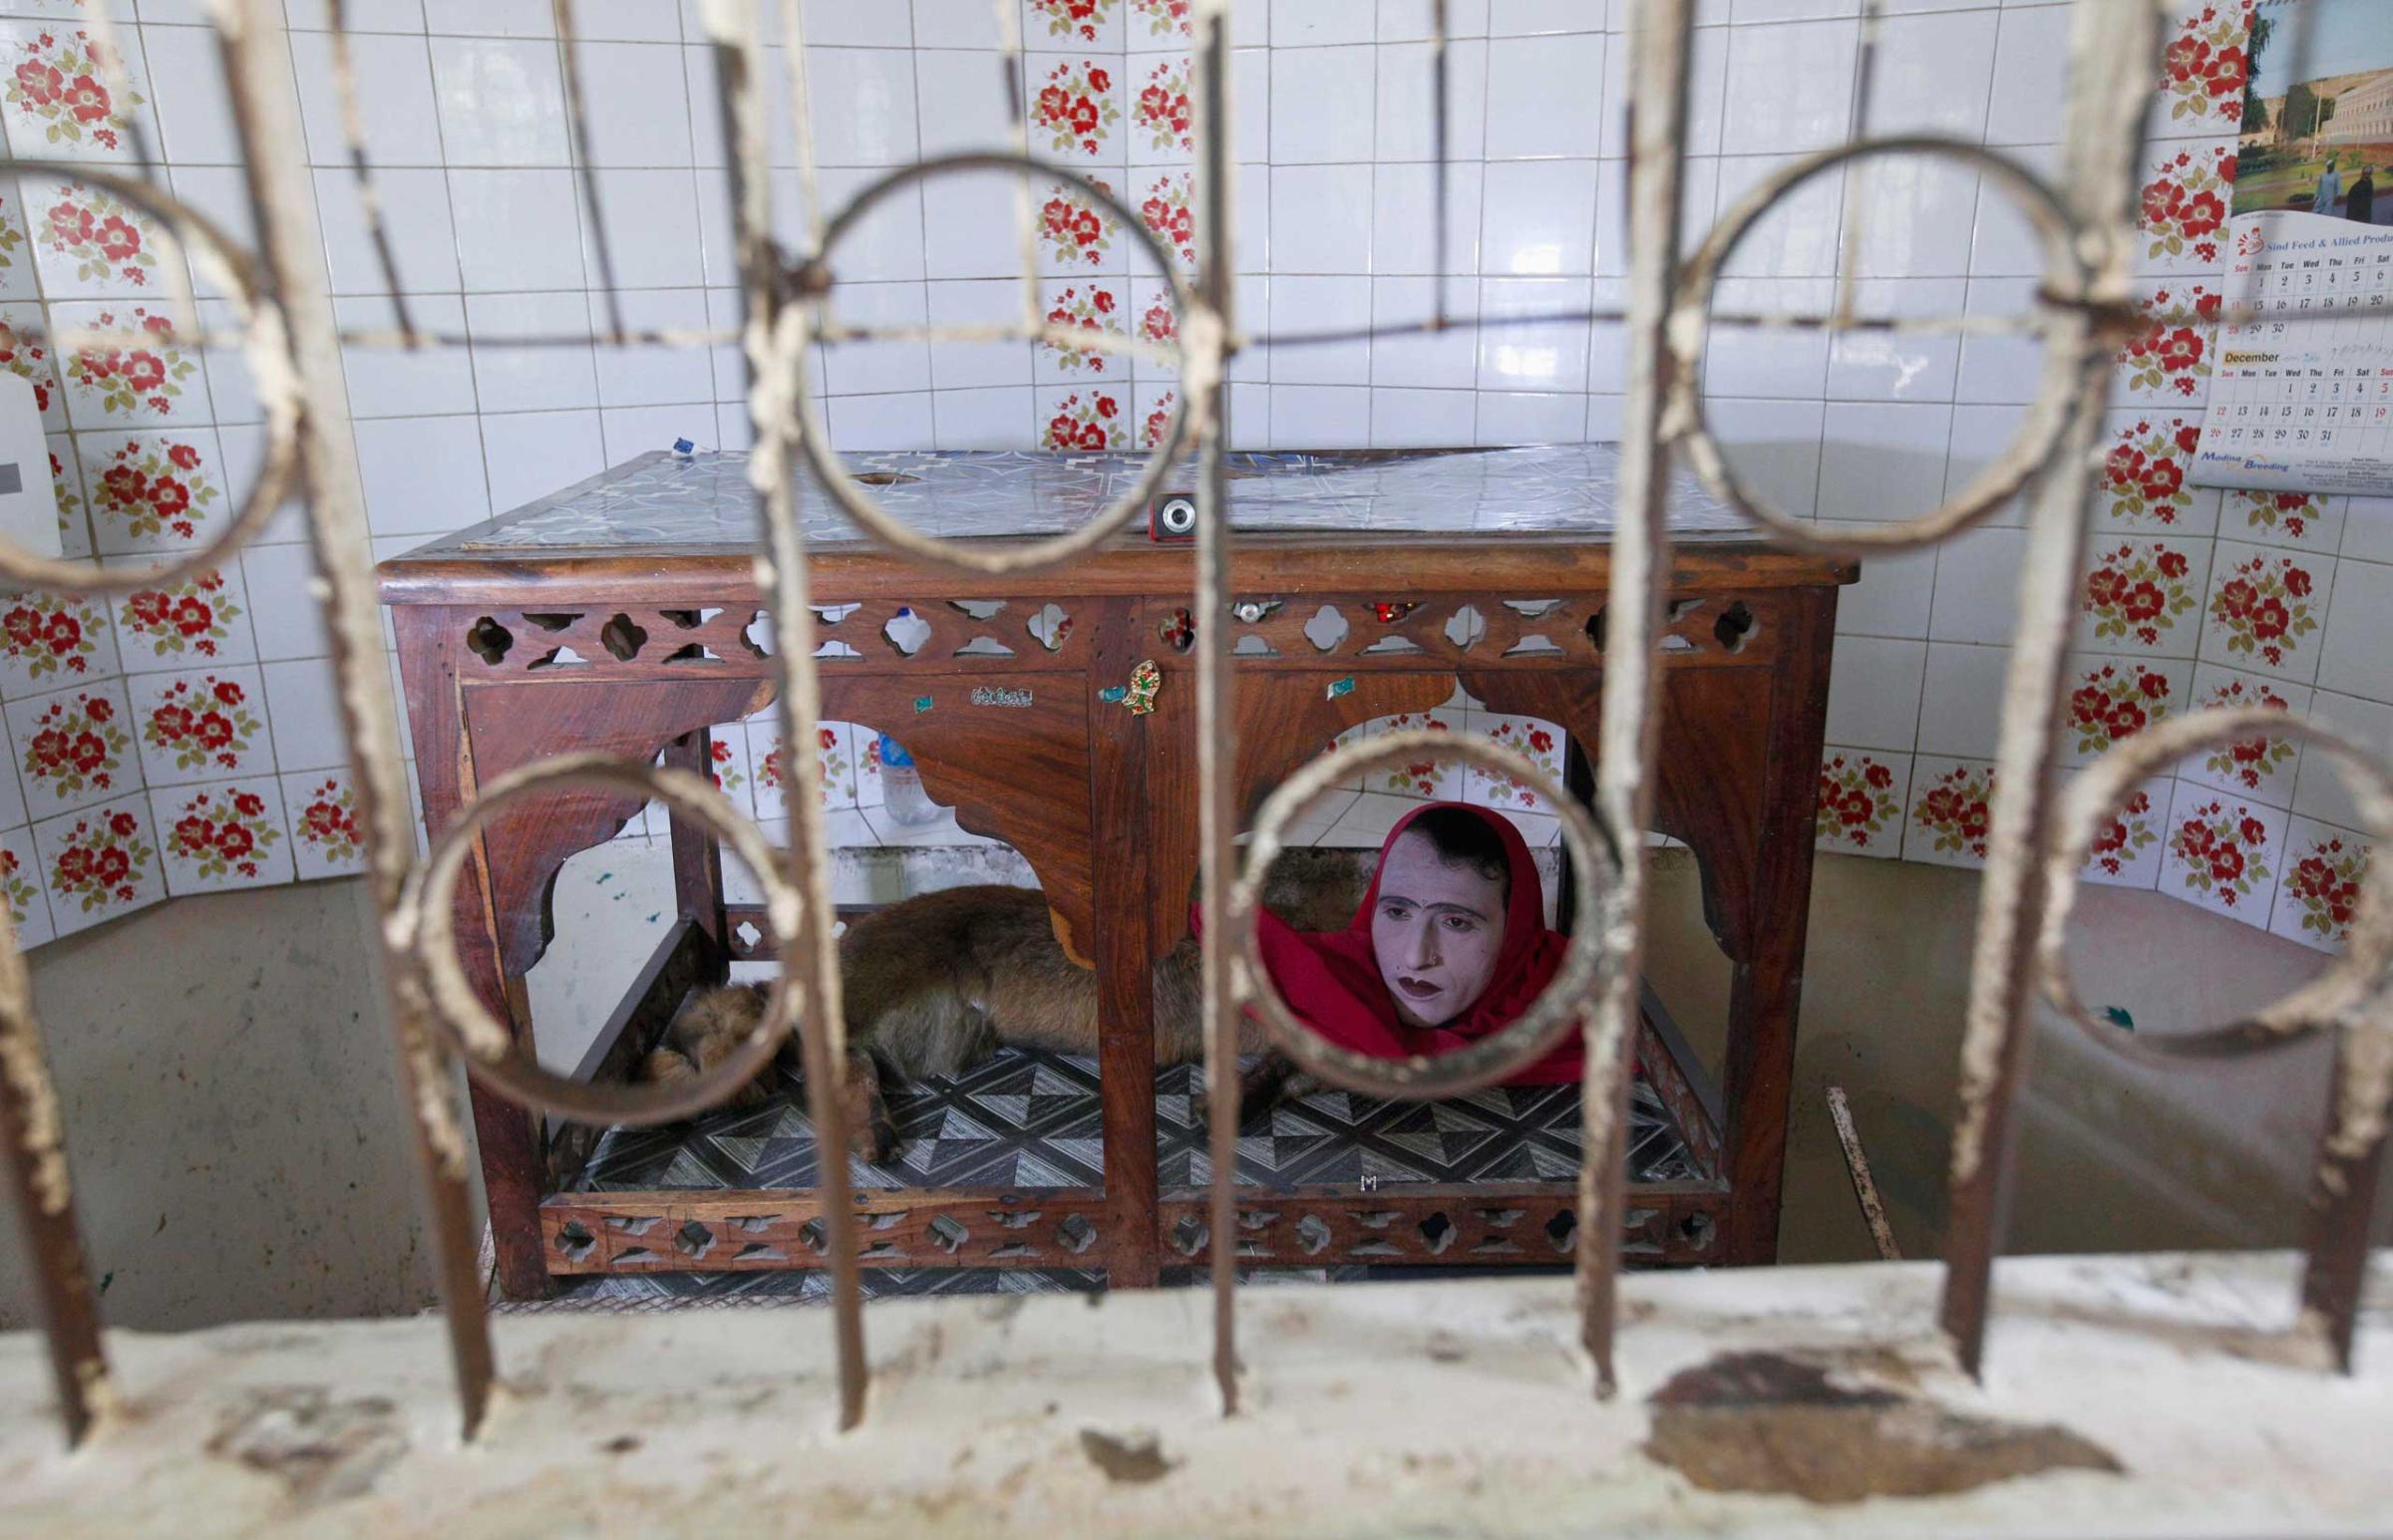 An entertainer performing as the character "Mumtaz Begum", a fox-human hybrid creature, sits inside a wooden canopy in a small room called Mumtaz Mahal, to amuse visitors at Karachi Zoo